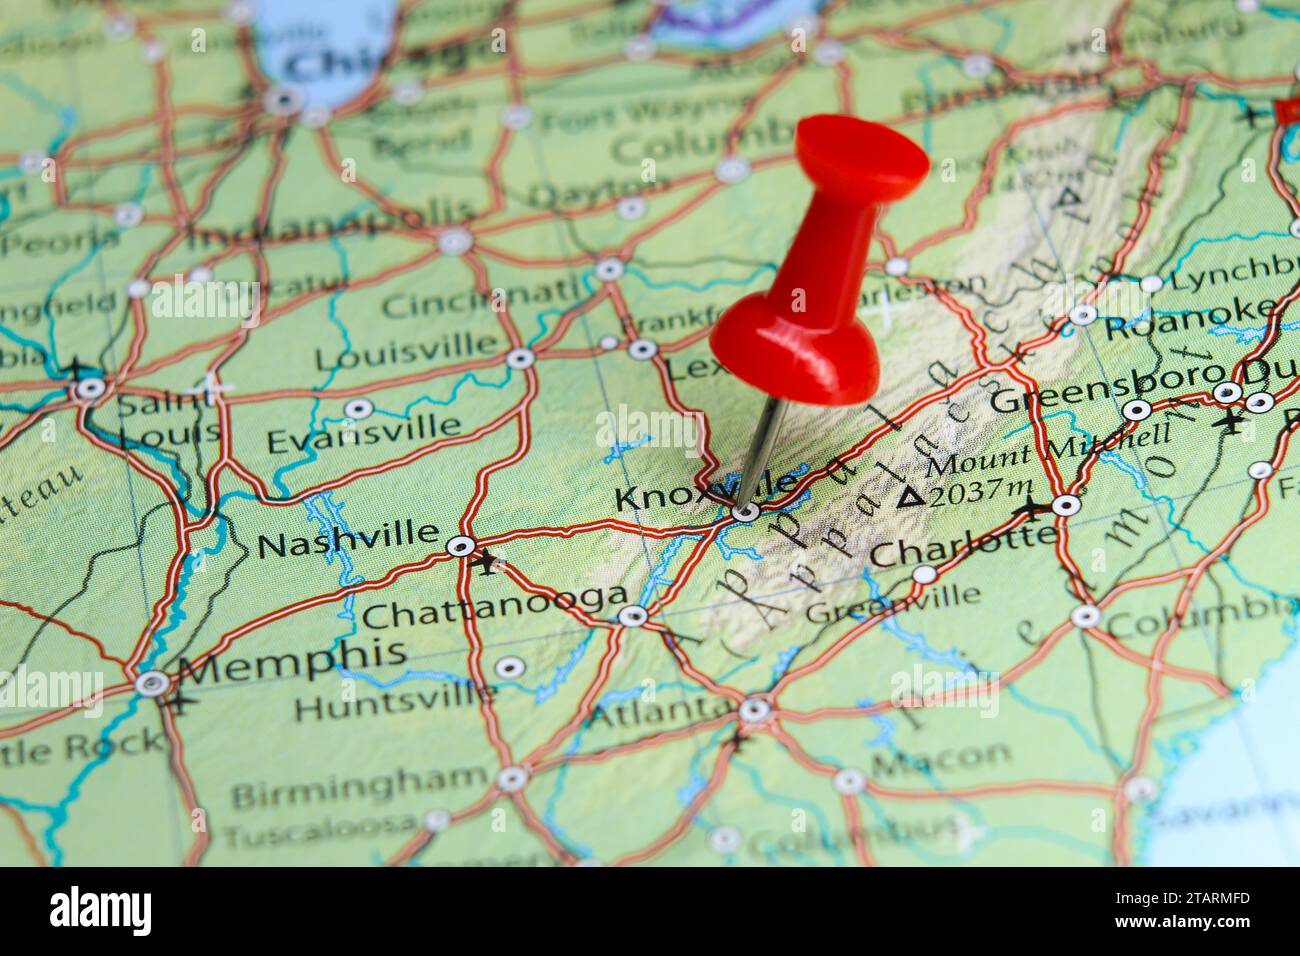 Knoxville, Tennessee pin on map Stock Photo